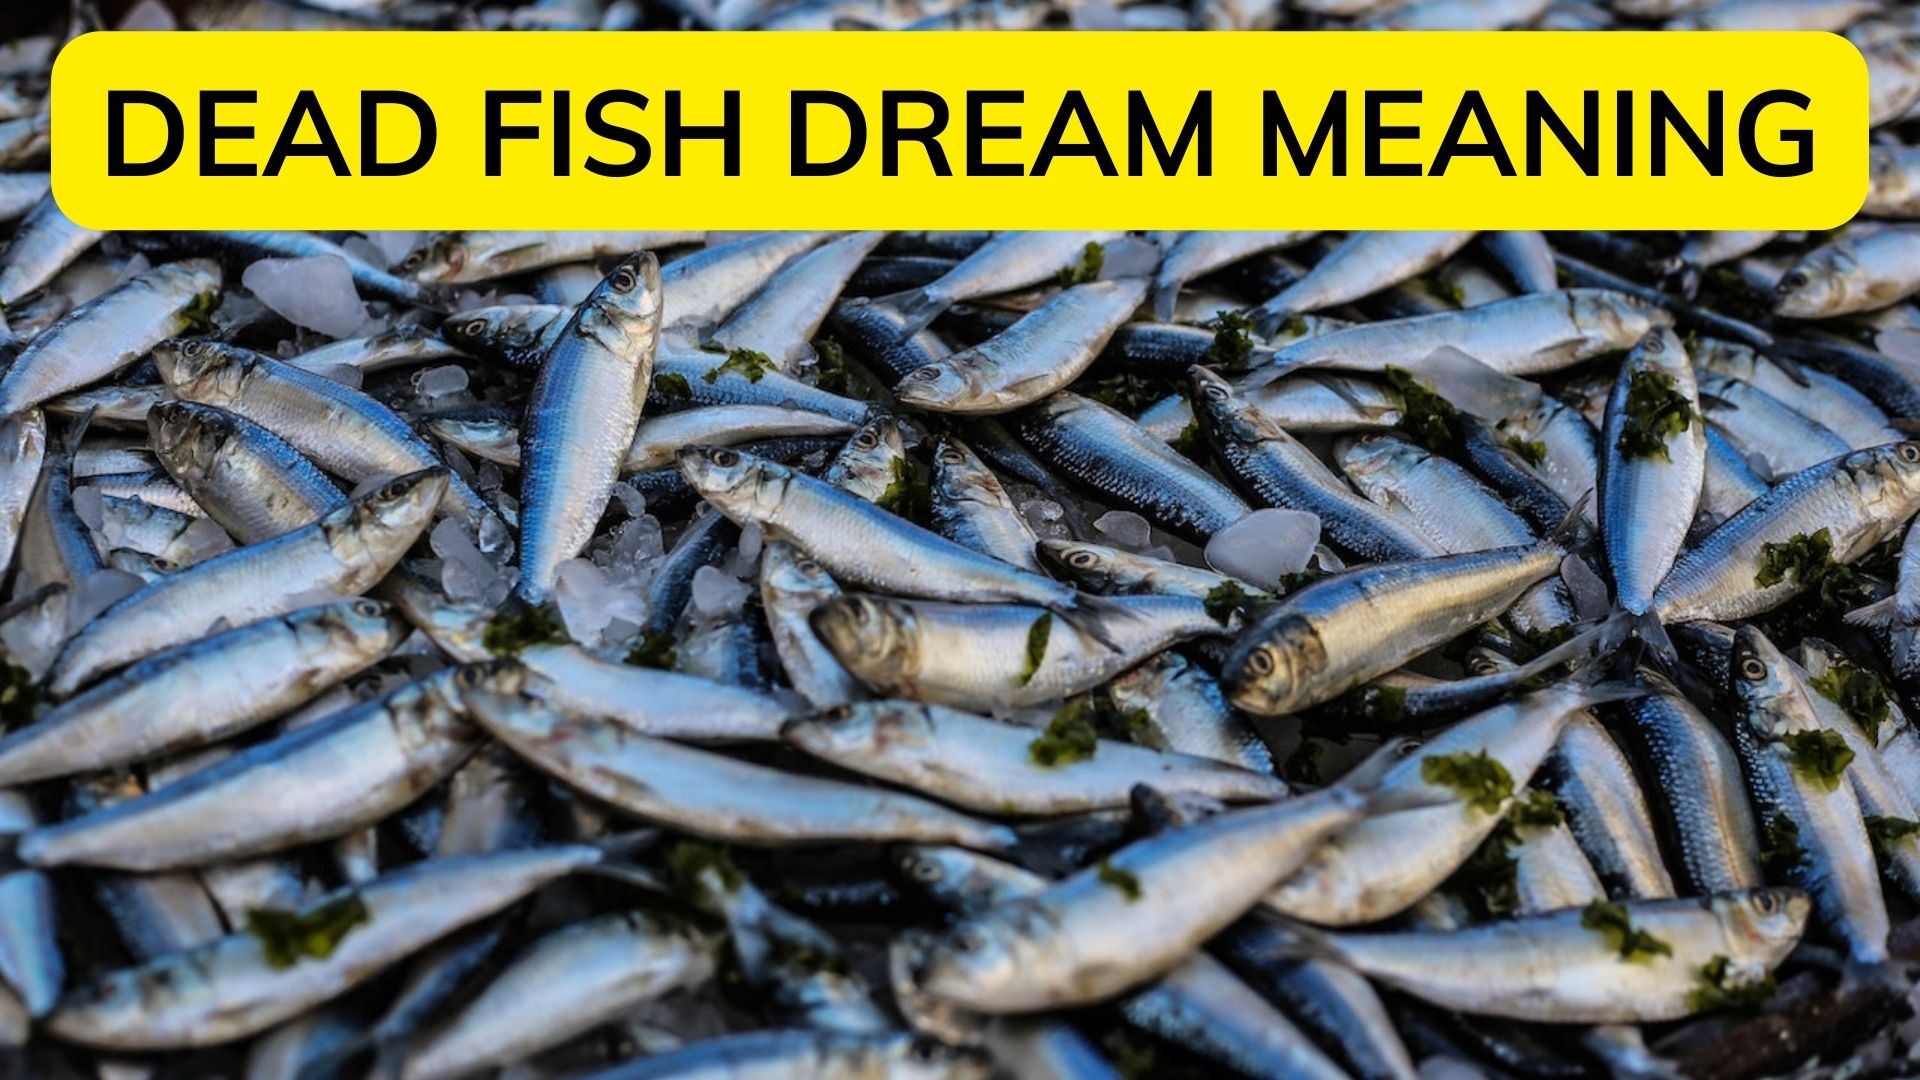 Dead Fish Dream Meaning - Conveys A Sense That Life Has Been Suspended